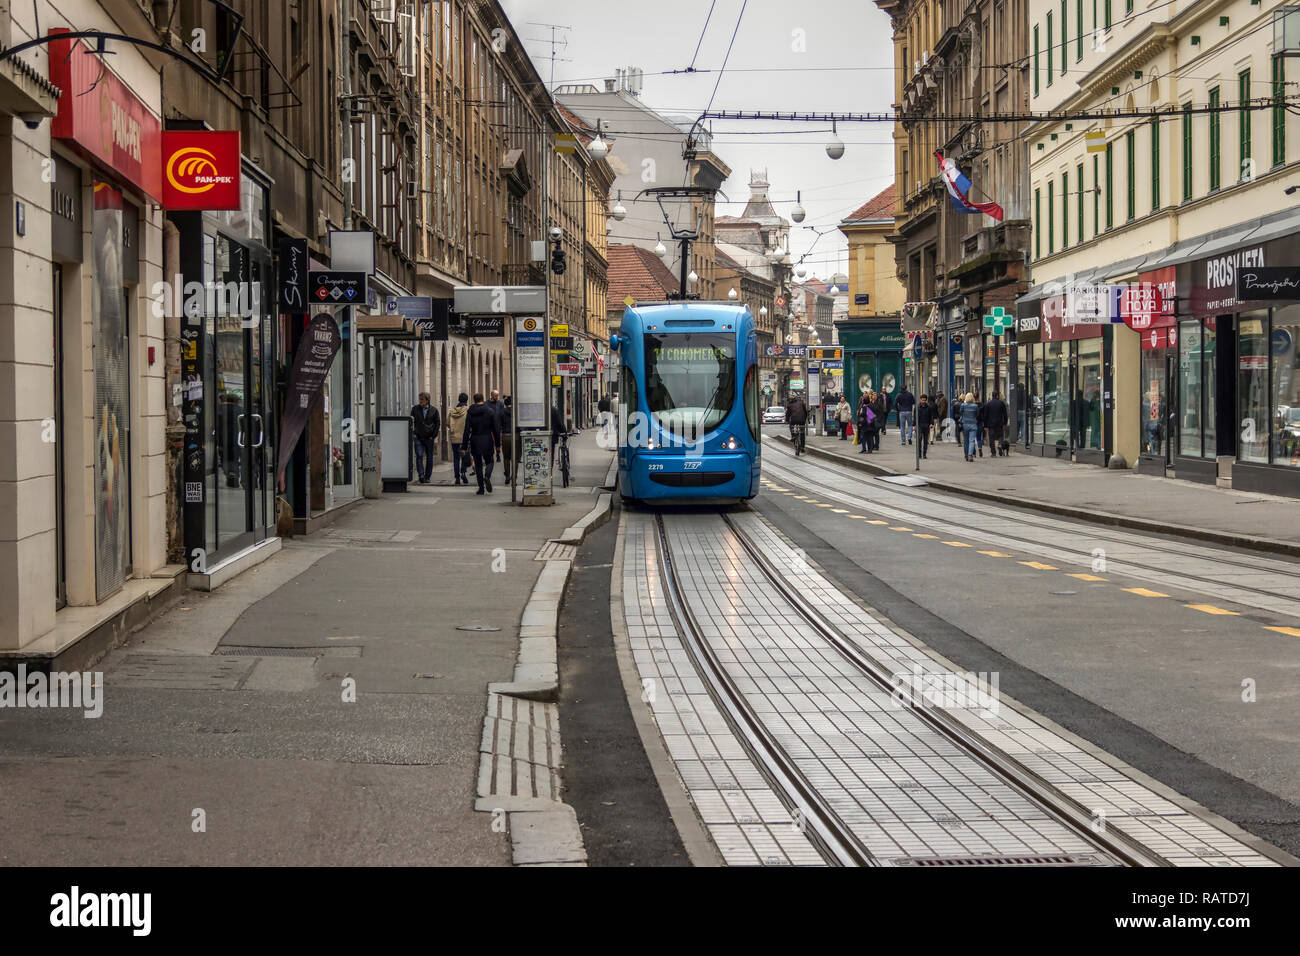 Zagreb, Croatia, November 2018 - View at the Ilica downtown street with pedestrians, tram and stores Stock Photo